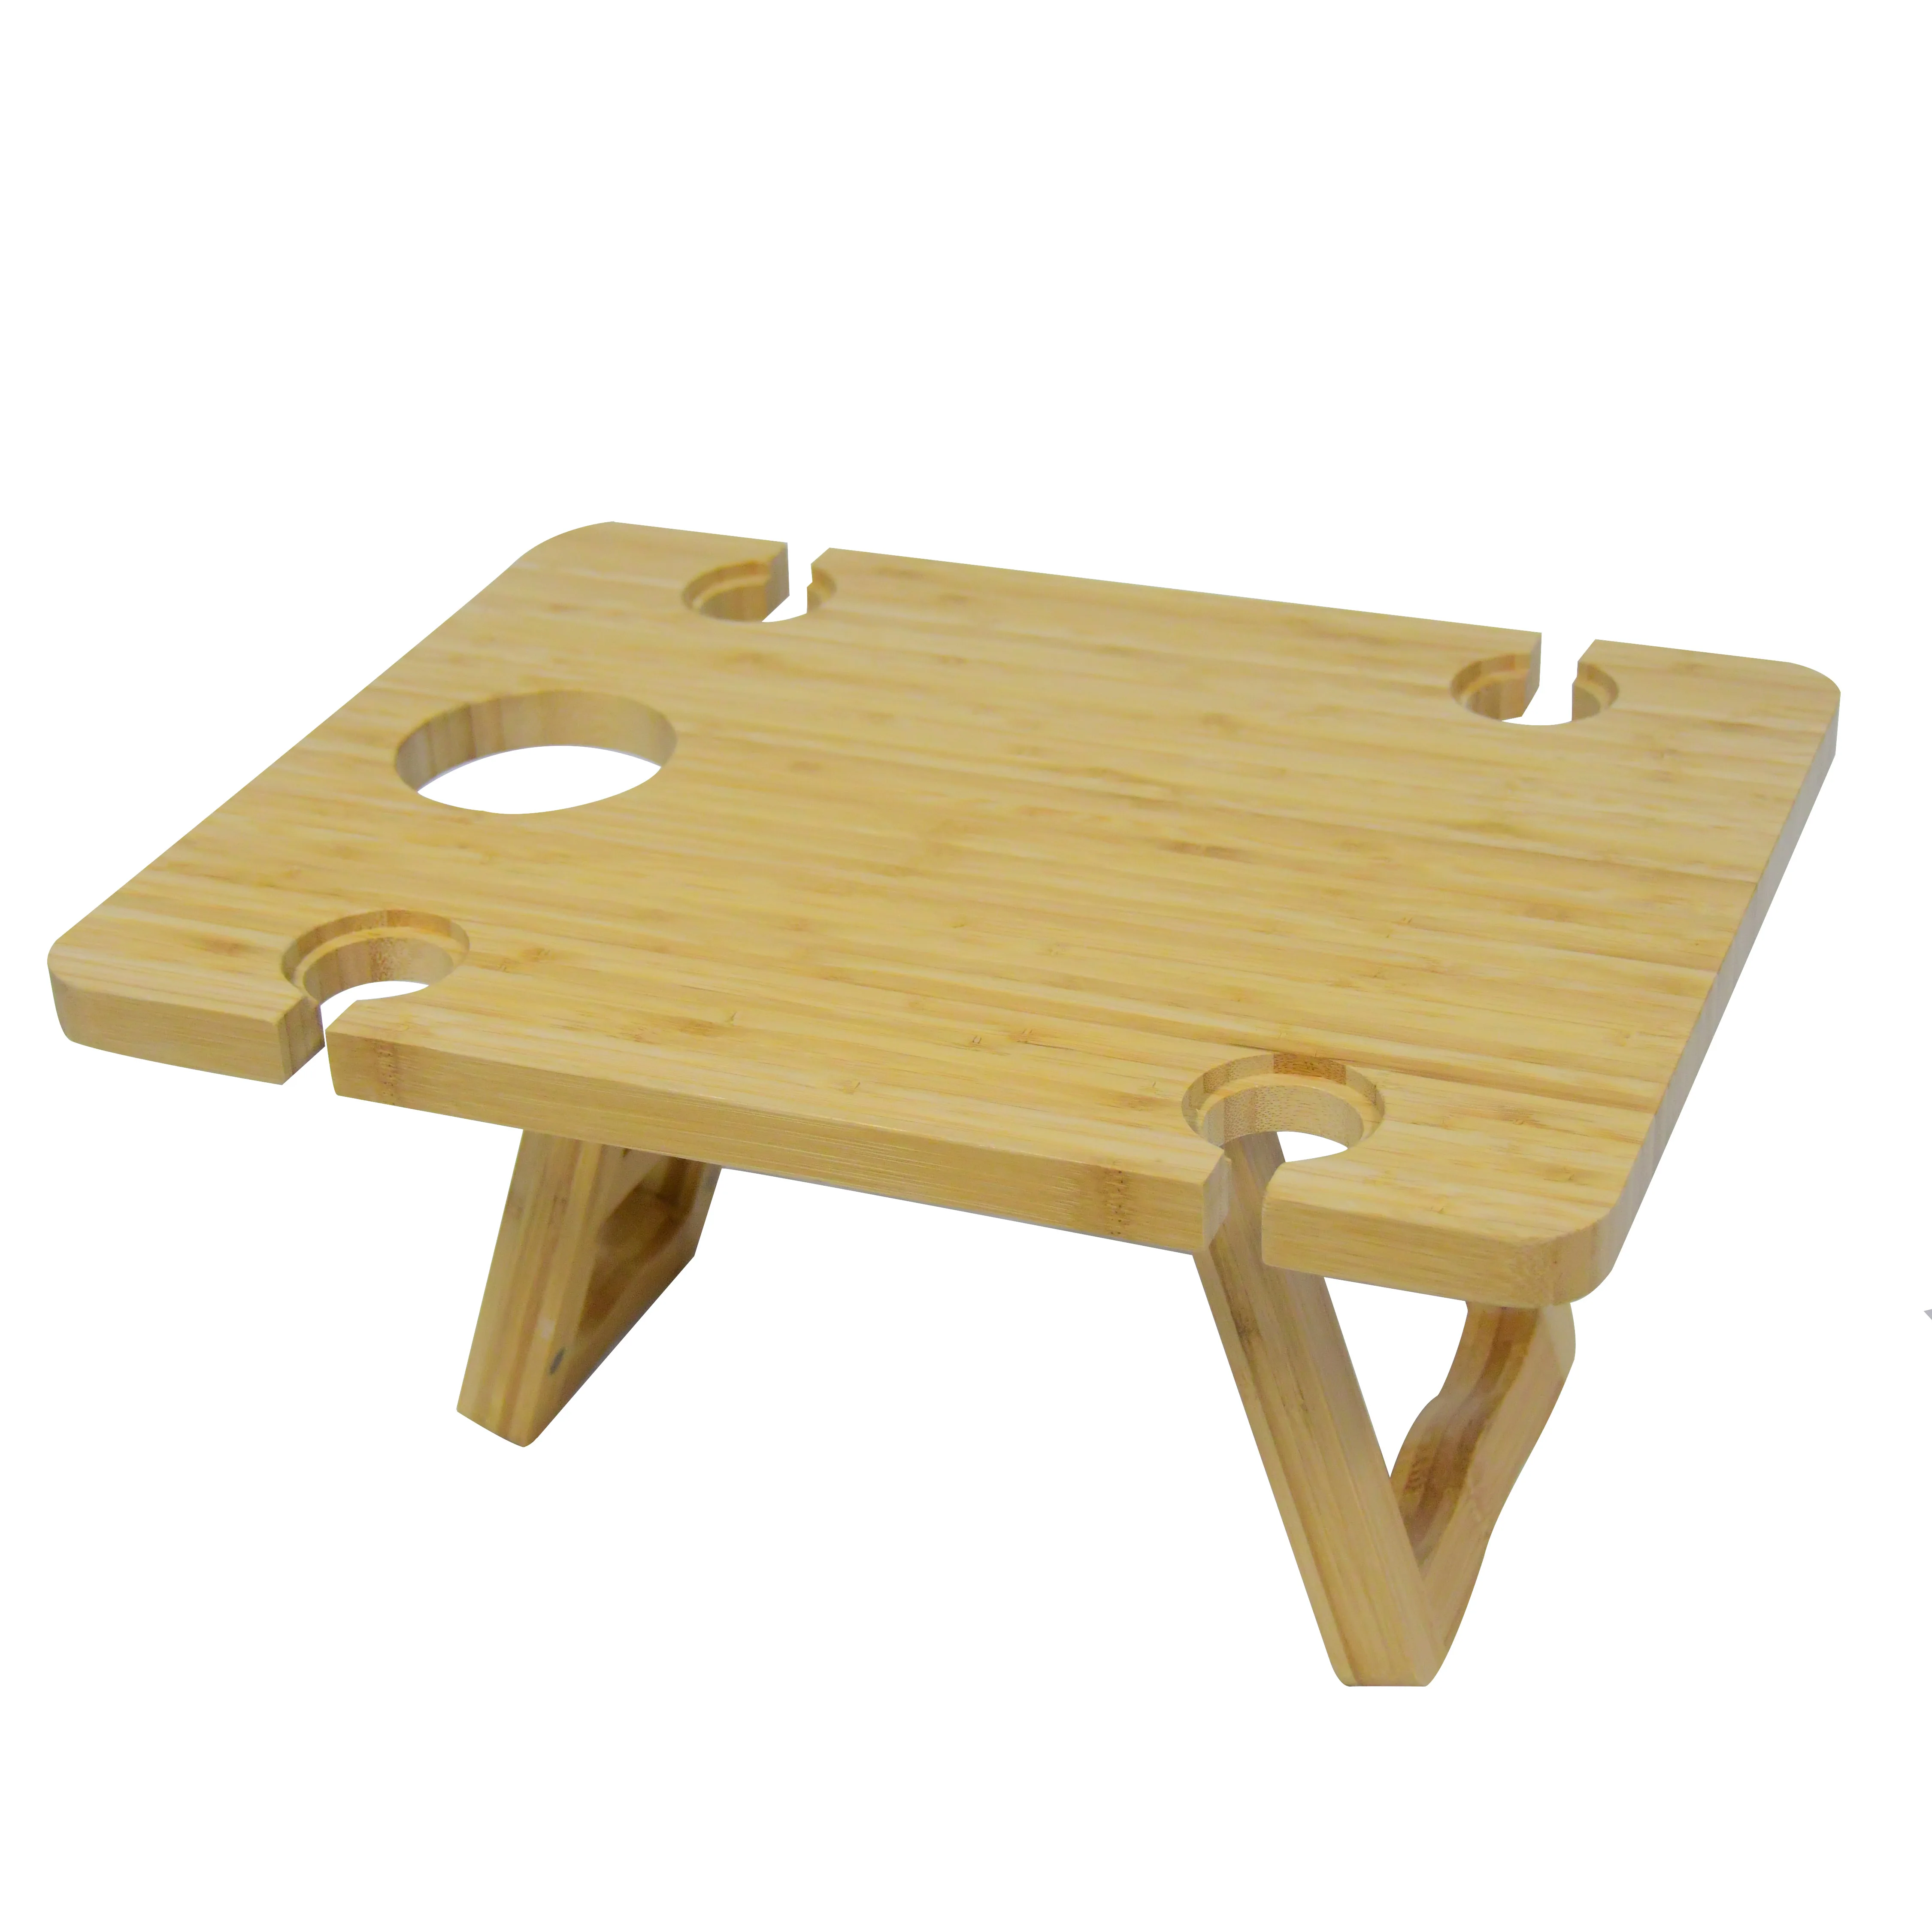 Portable Wine Picnic Table - Premium Natural Bamboo Folding Charcuterie Meat and Cheese Tray with Bottle and Four Glass Holder